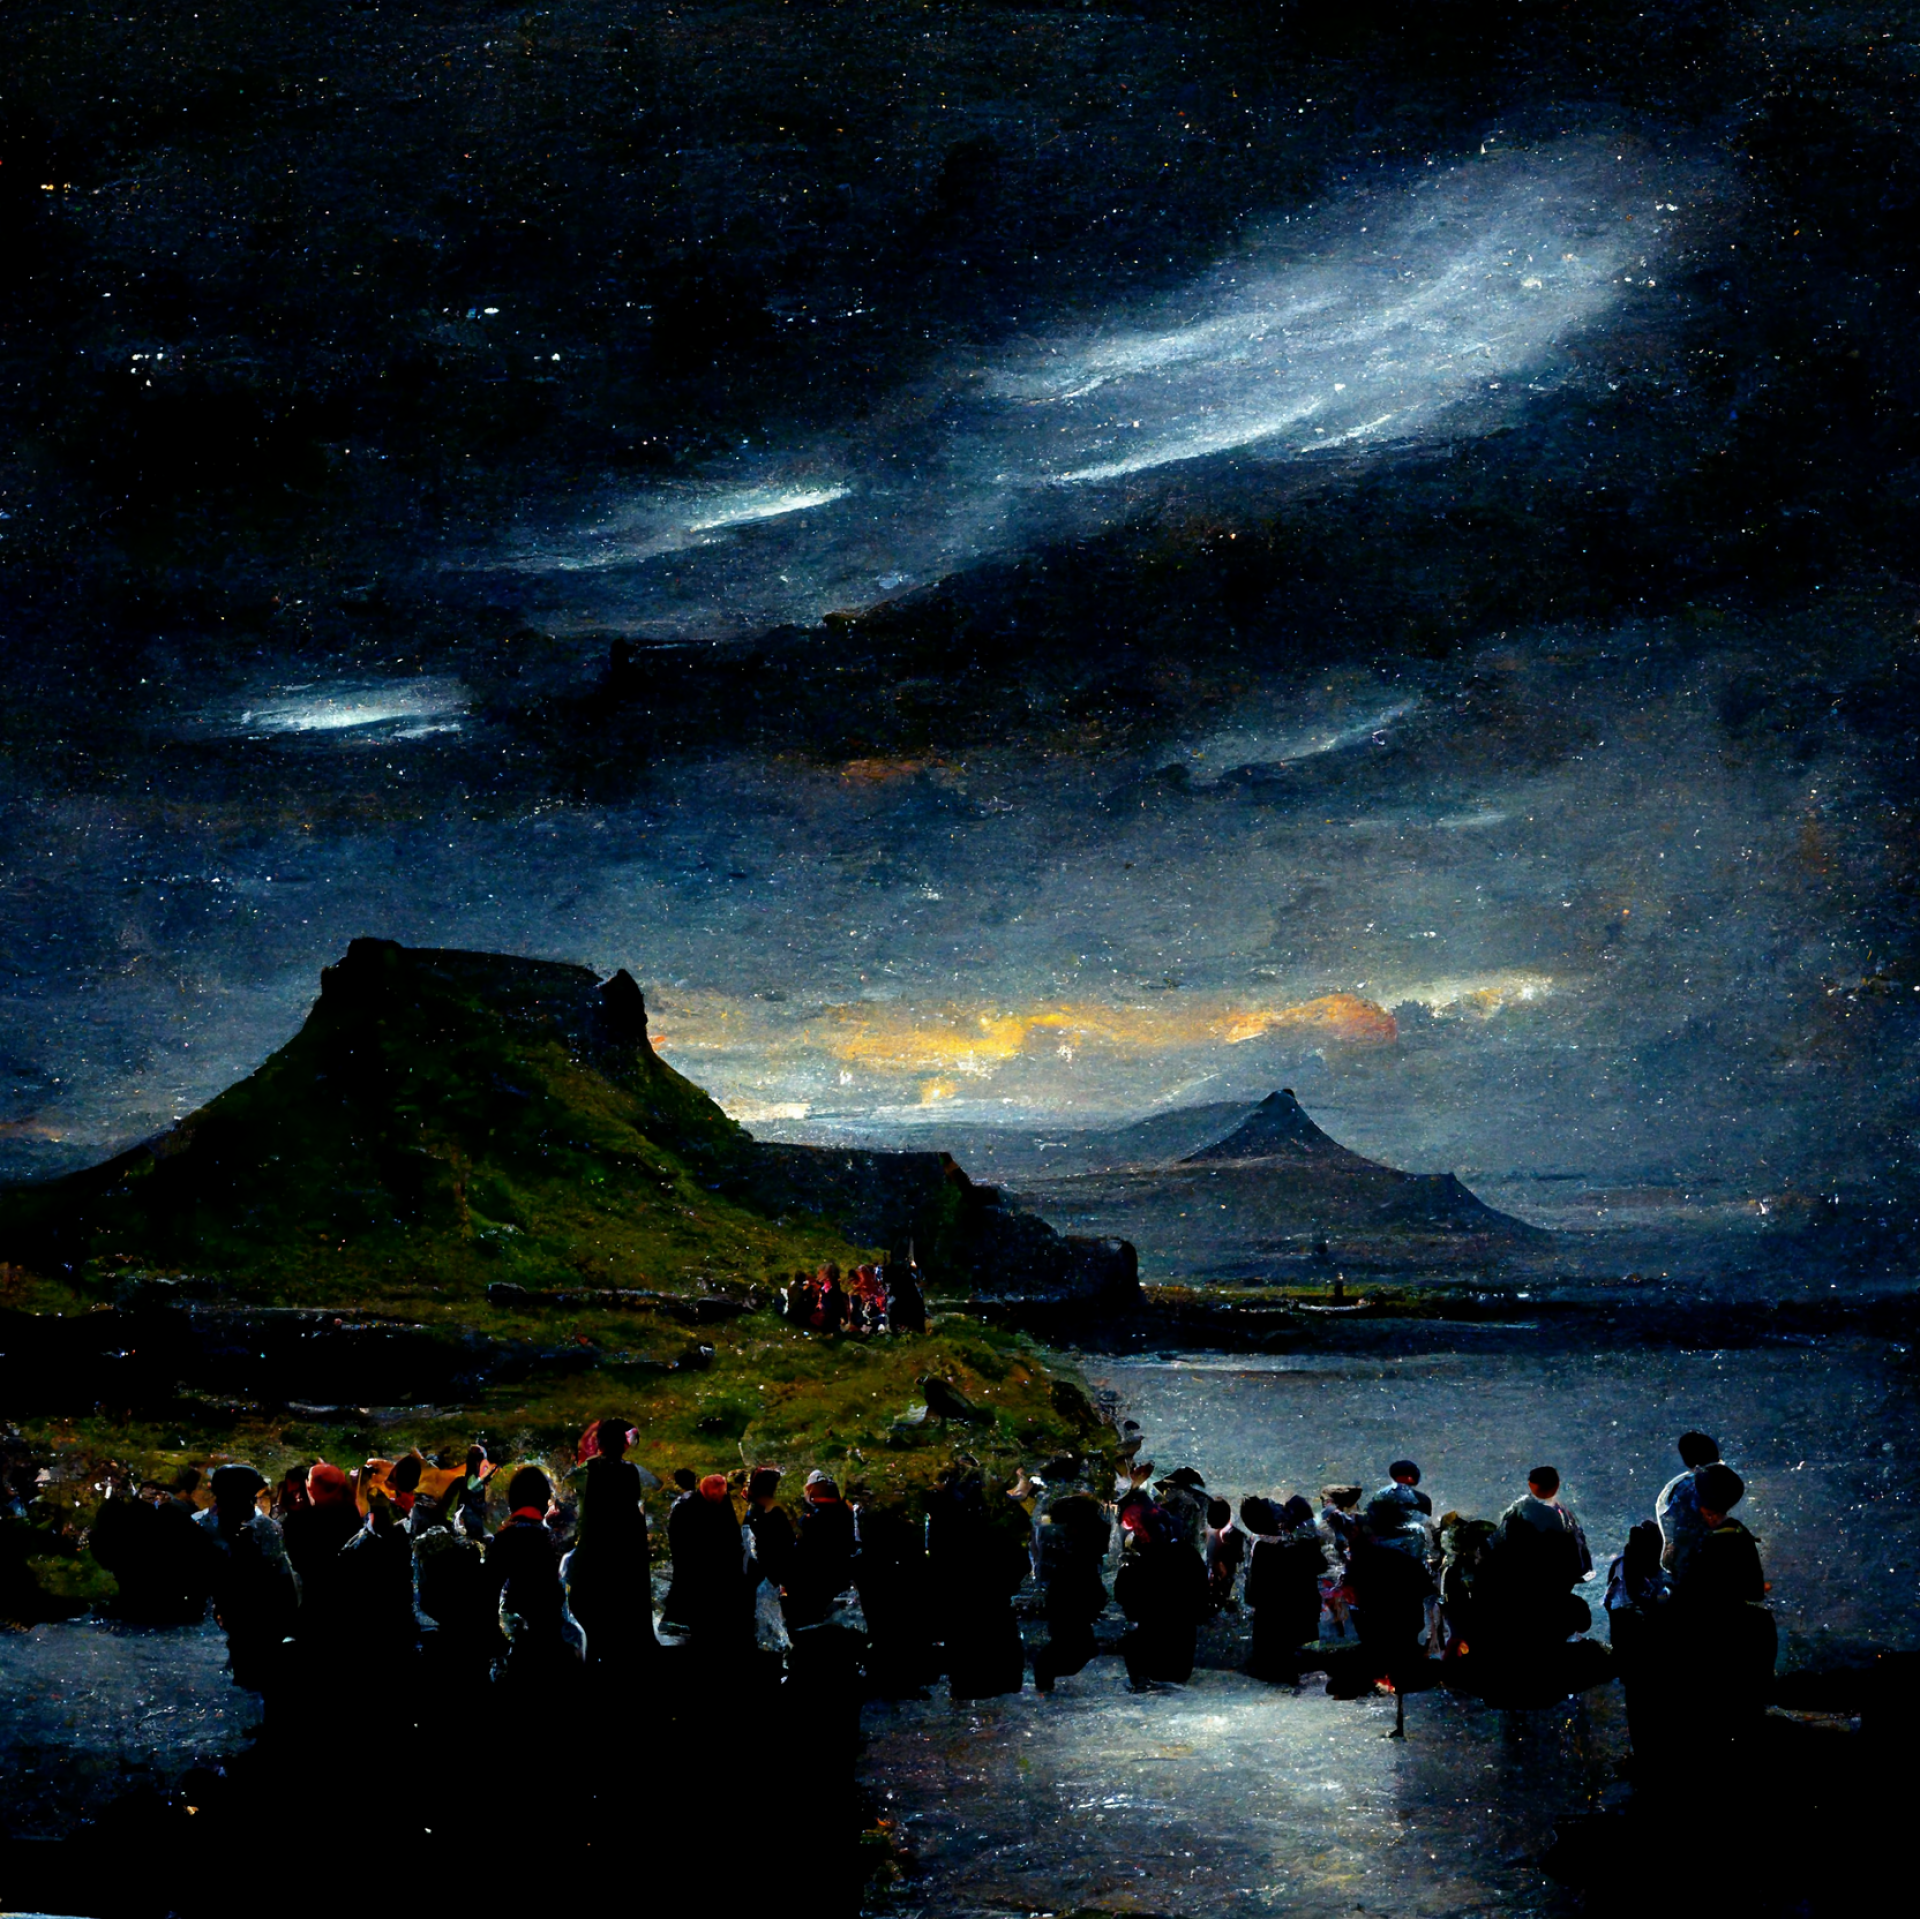 AI-generated image from Midjourney, the Faroe Islands inspired by Rembrandt